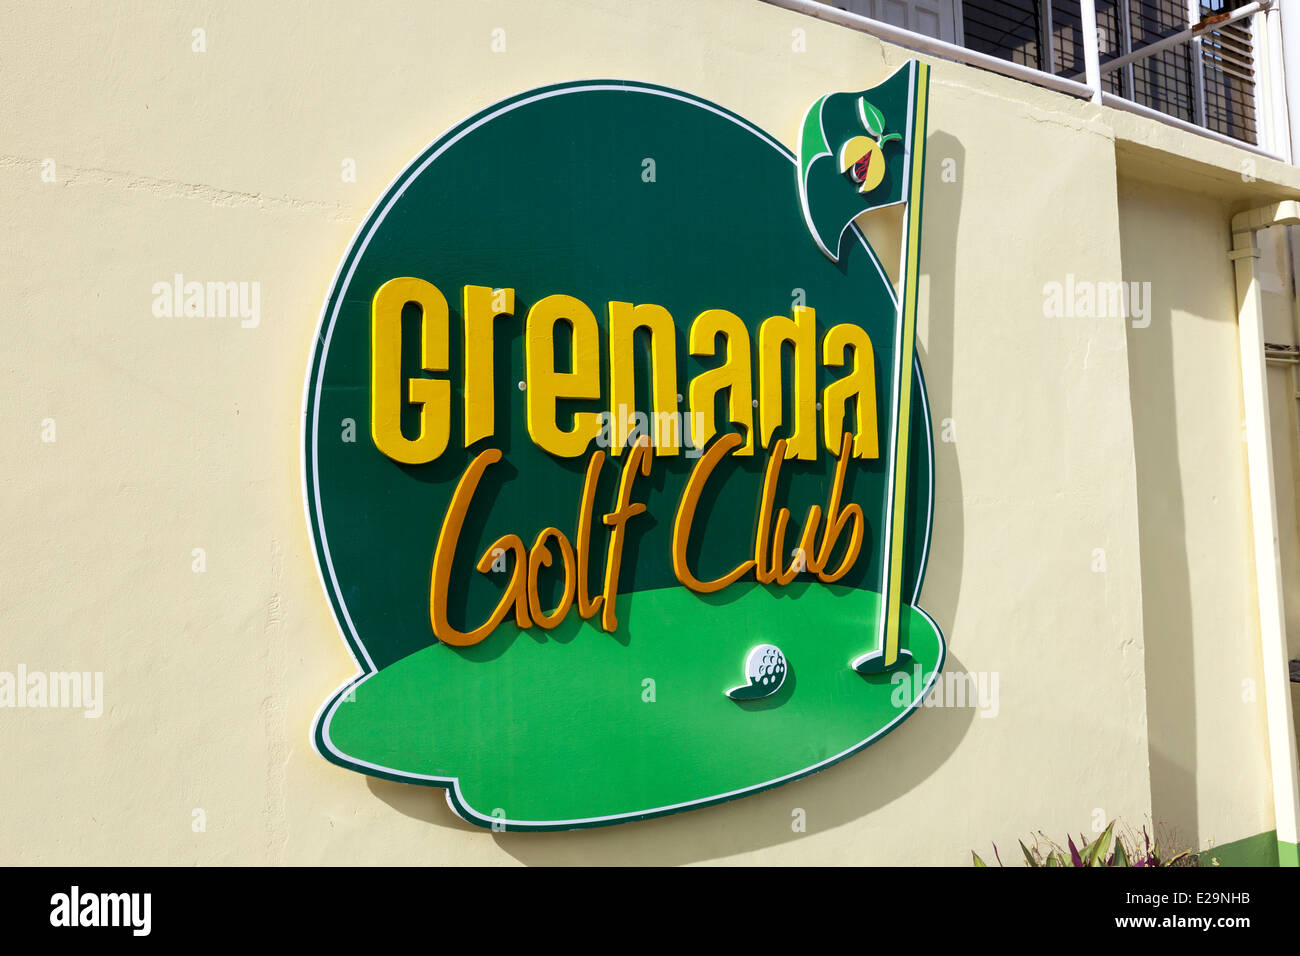 Sign for Grenada Golf Club, St George, Grenada, West Indies Stock Photo